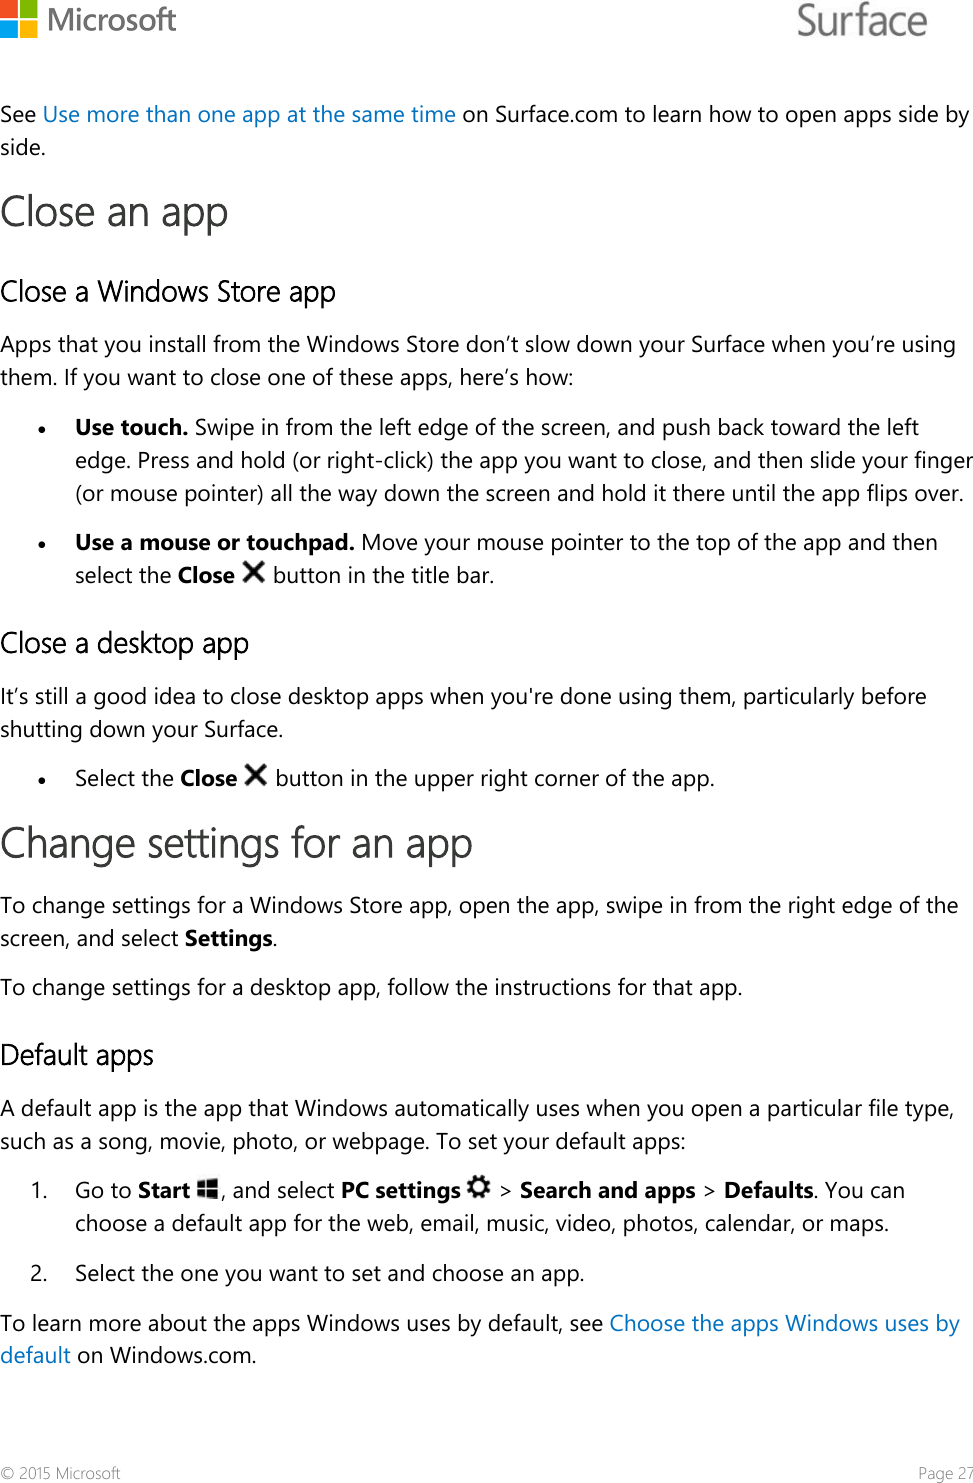     See Use more than one app at the same time on Surface.com to learn how to open apps side by side.   Close an app Close a Windows Store app Apps that you install from the Windows Store don’t slow down your Surface when you’re using them. If you want to close one of these apps, here’s how: • Use touch. Swipe in from the left edge of the screen, and push back toward the left edge. Press and hold (or right-click) the app you want to close, and then slide your finger (or mouse pointer) all the way down the screen and hold it there until the app flips over. • Use a mouse or touchpad. Move your mouse pointer to the top of the app and then select the Close   button in the title bar. Close a desktop app It’s still a good idea to close desktop apps when you&apos;re done using them, particularly before shutting down your Surface.  • Select the Close   button in the upper right corner of the app. Change settings for an app To change settings for a Windows Store app, open the app, swipe in from the right edge of the screen, and select Settings. To change settings for a desktop app, follow the instructions for that app. Default apps A default app is the app that Windows automatically uses when you open a particular file type, such as a song, movie, photo, or webpage. To set your default apps: 1. Go to Start , and select PC settings   &gt; Search and apps &gt; Defaults. You can choose a default app for the web, email, music, video, photos, calendar, or maps. 2. Select the one you want to set and choose an app. To learn more about the apps Windows uses by default, see Choose the apps Windows uses by default on Windows.com. © 2015 Microsoft    Page 27 